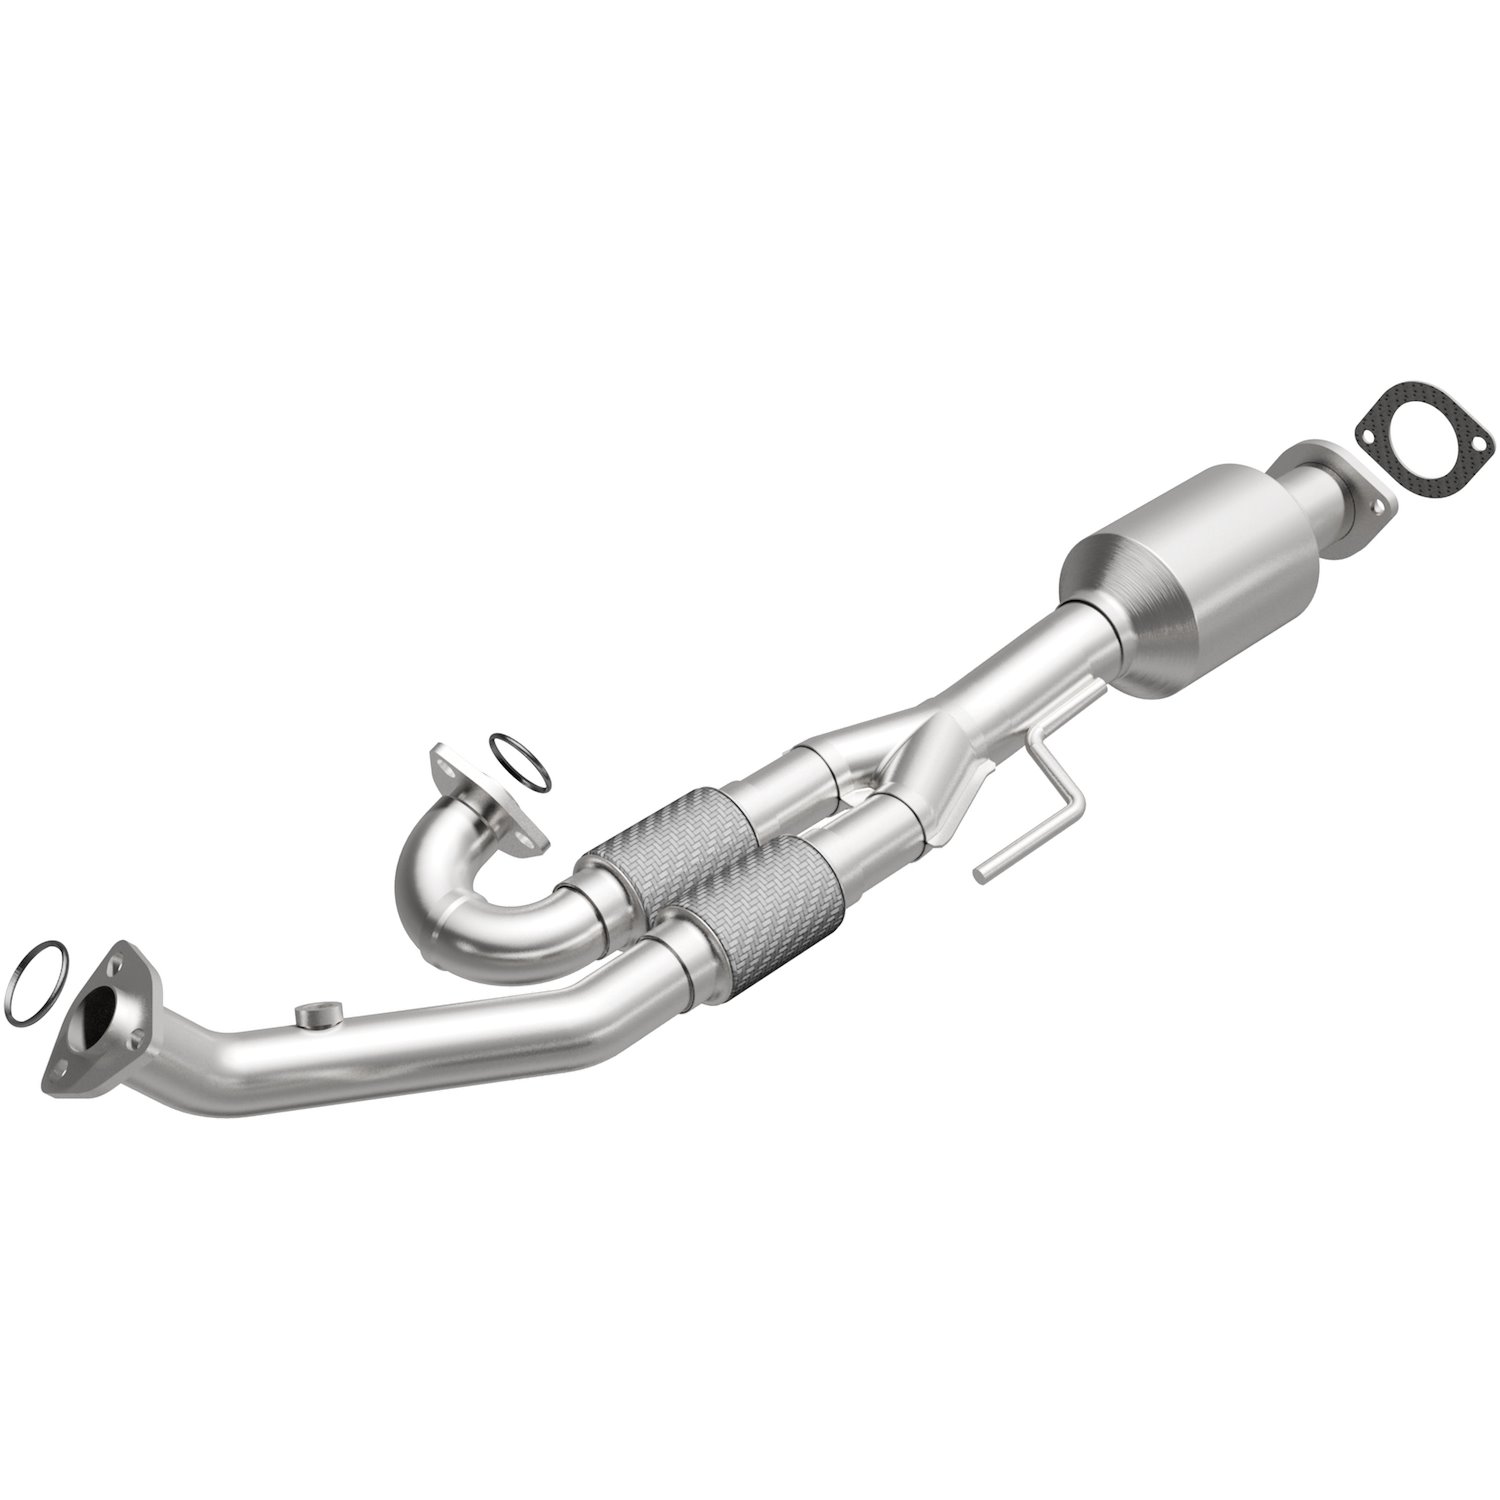 2005-2009 Nissan Quest California Grade CARB Compliant Direct-Fit Catalytic Converter